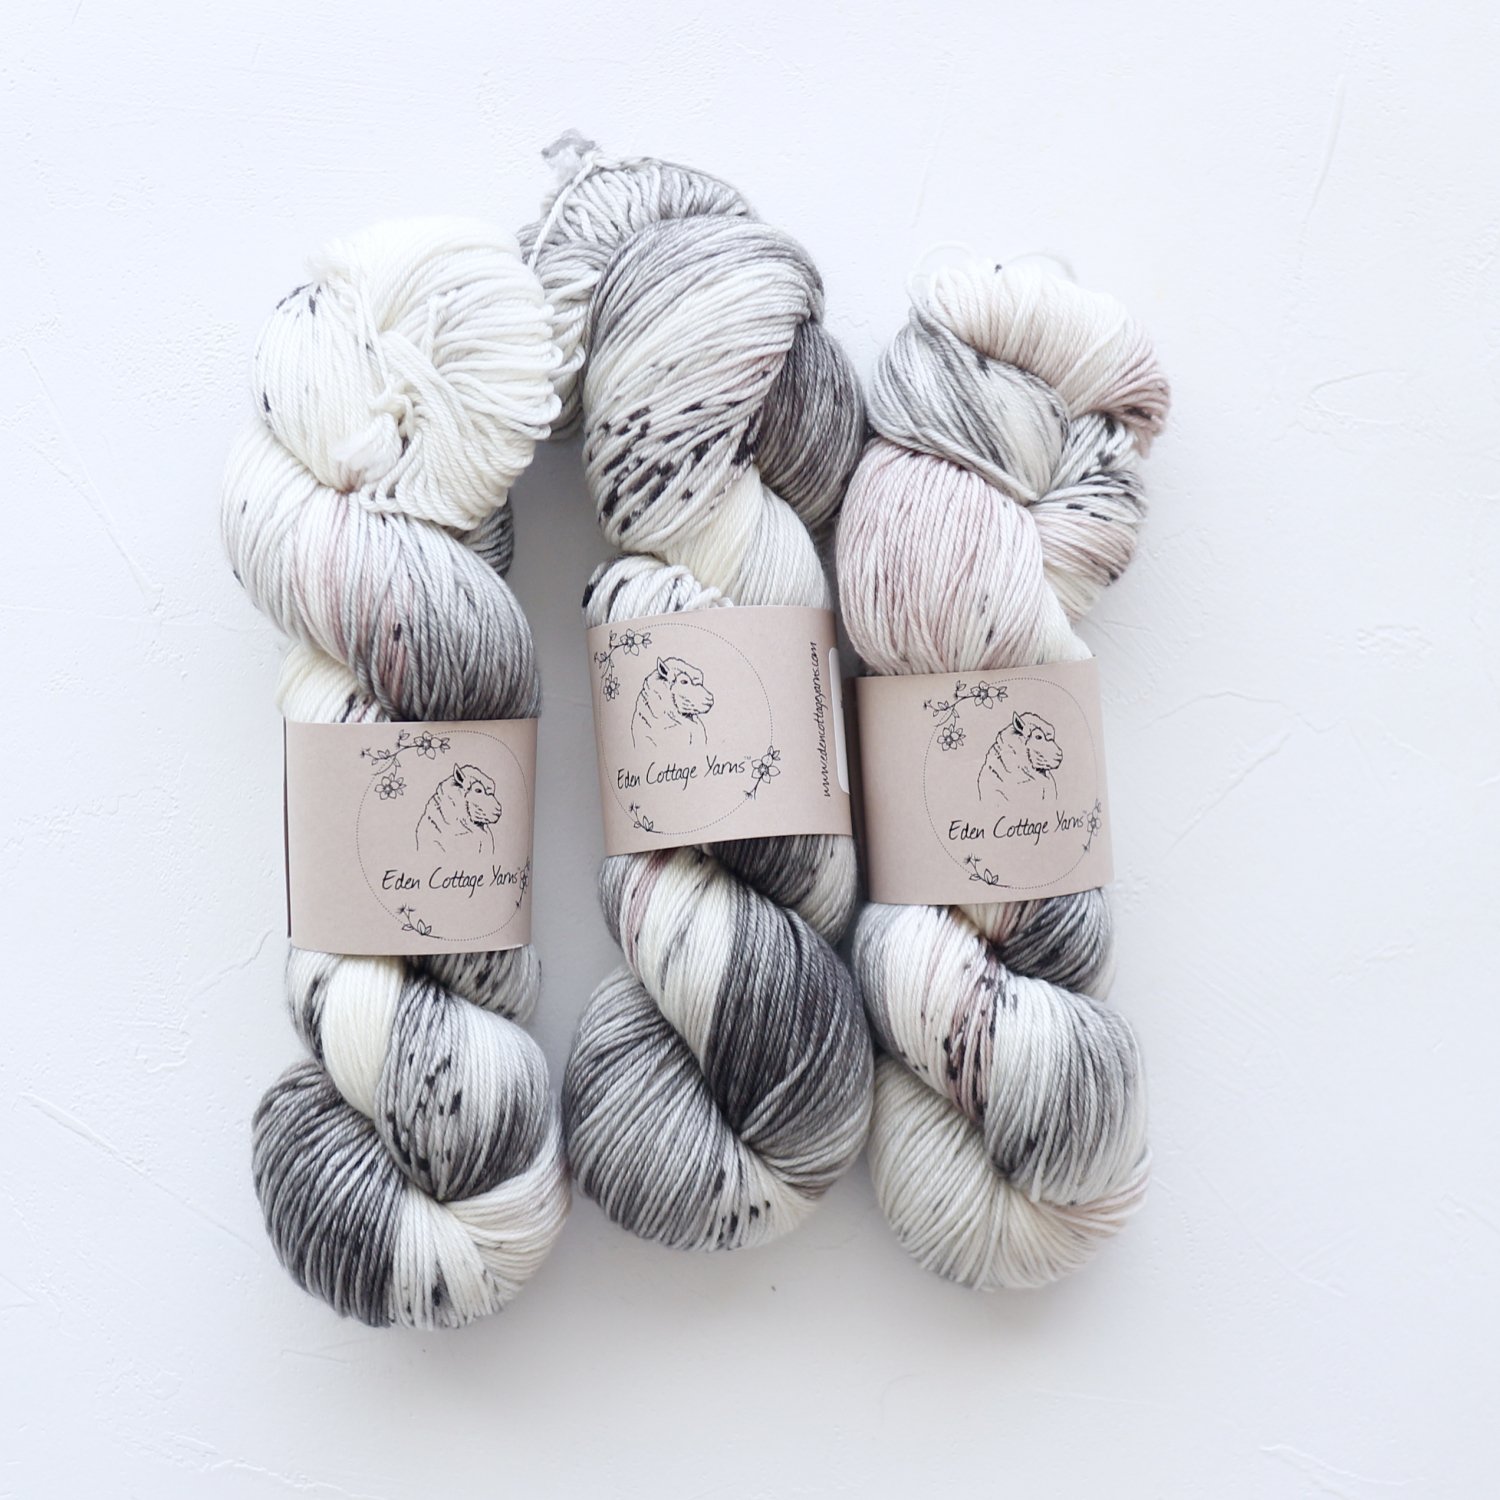 Eden Cottage Yarns<br>Pendle 4ply<br>Snowy Owl